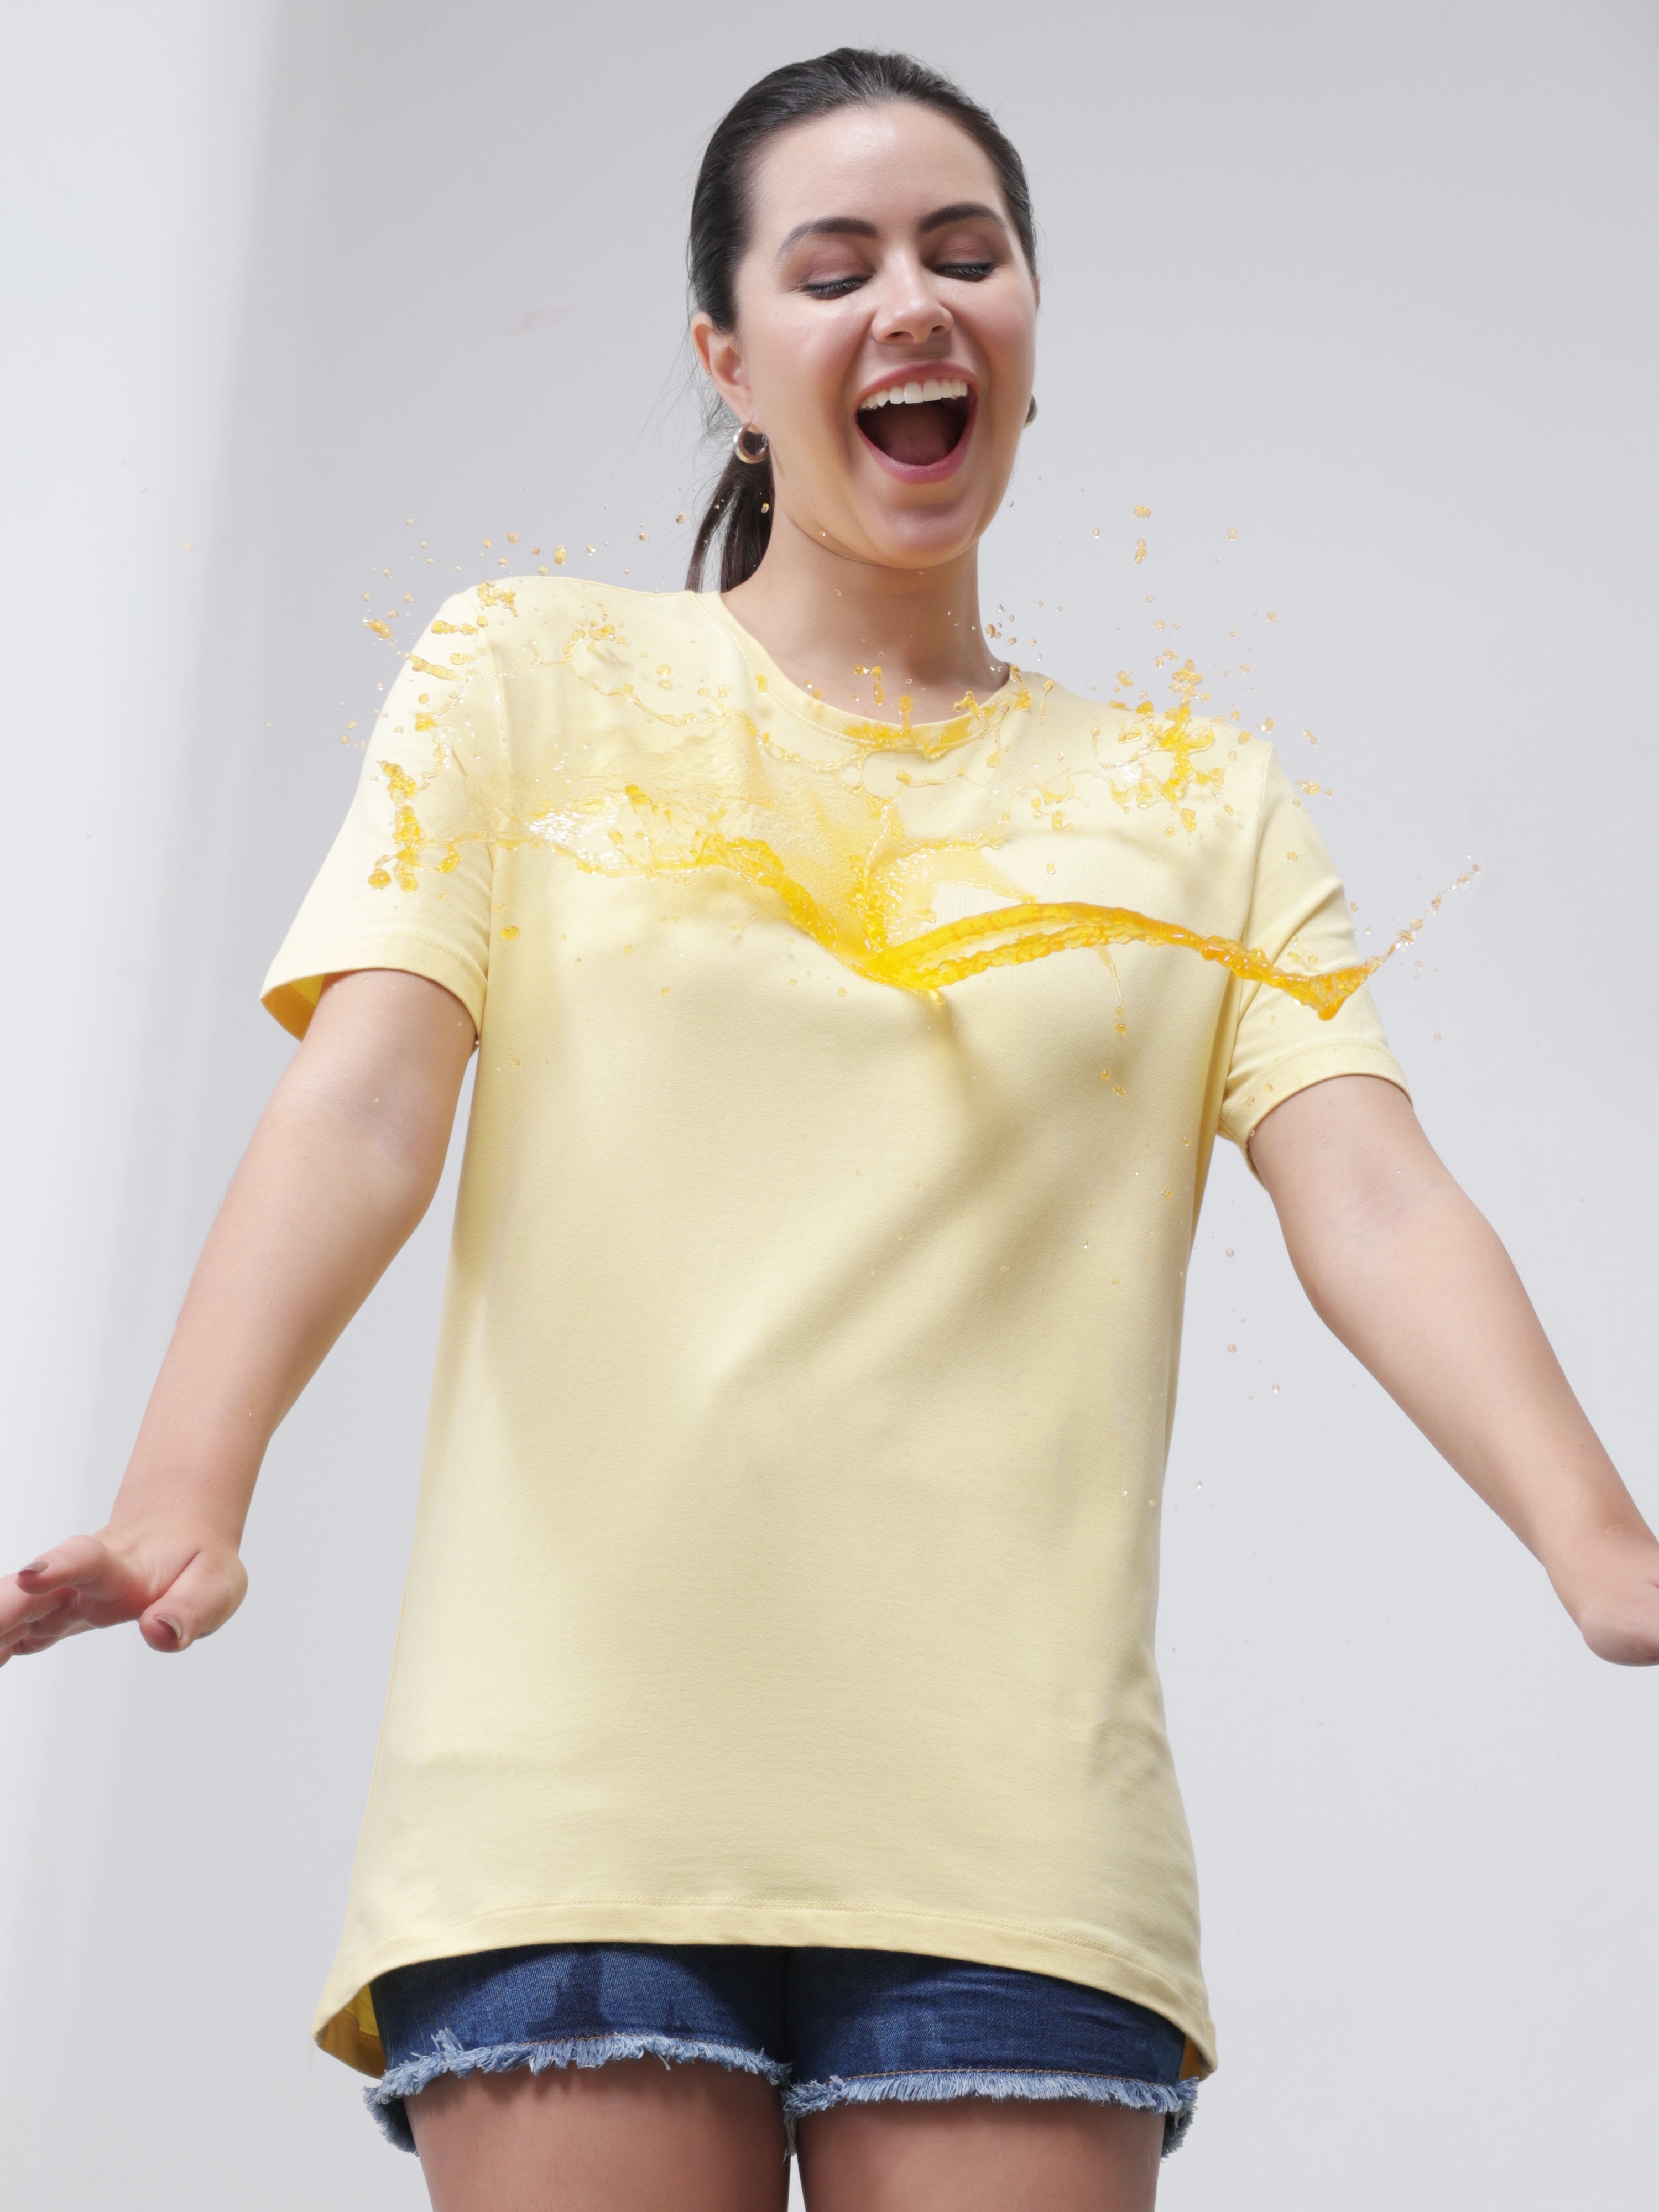 Woman wearing stain-resistant round neck yellow Turms T-shirt, enjoying spill resistance, promoting stylish, premium cotton casual wear for men and women.